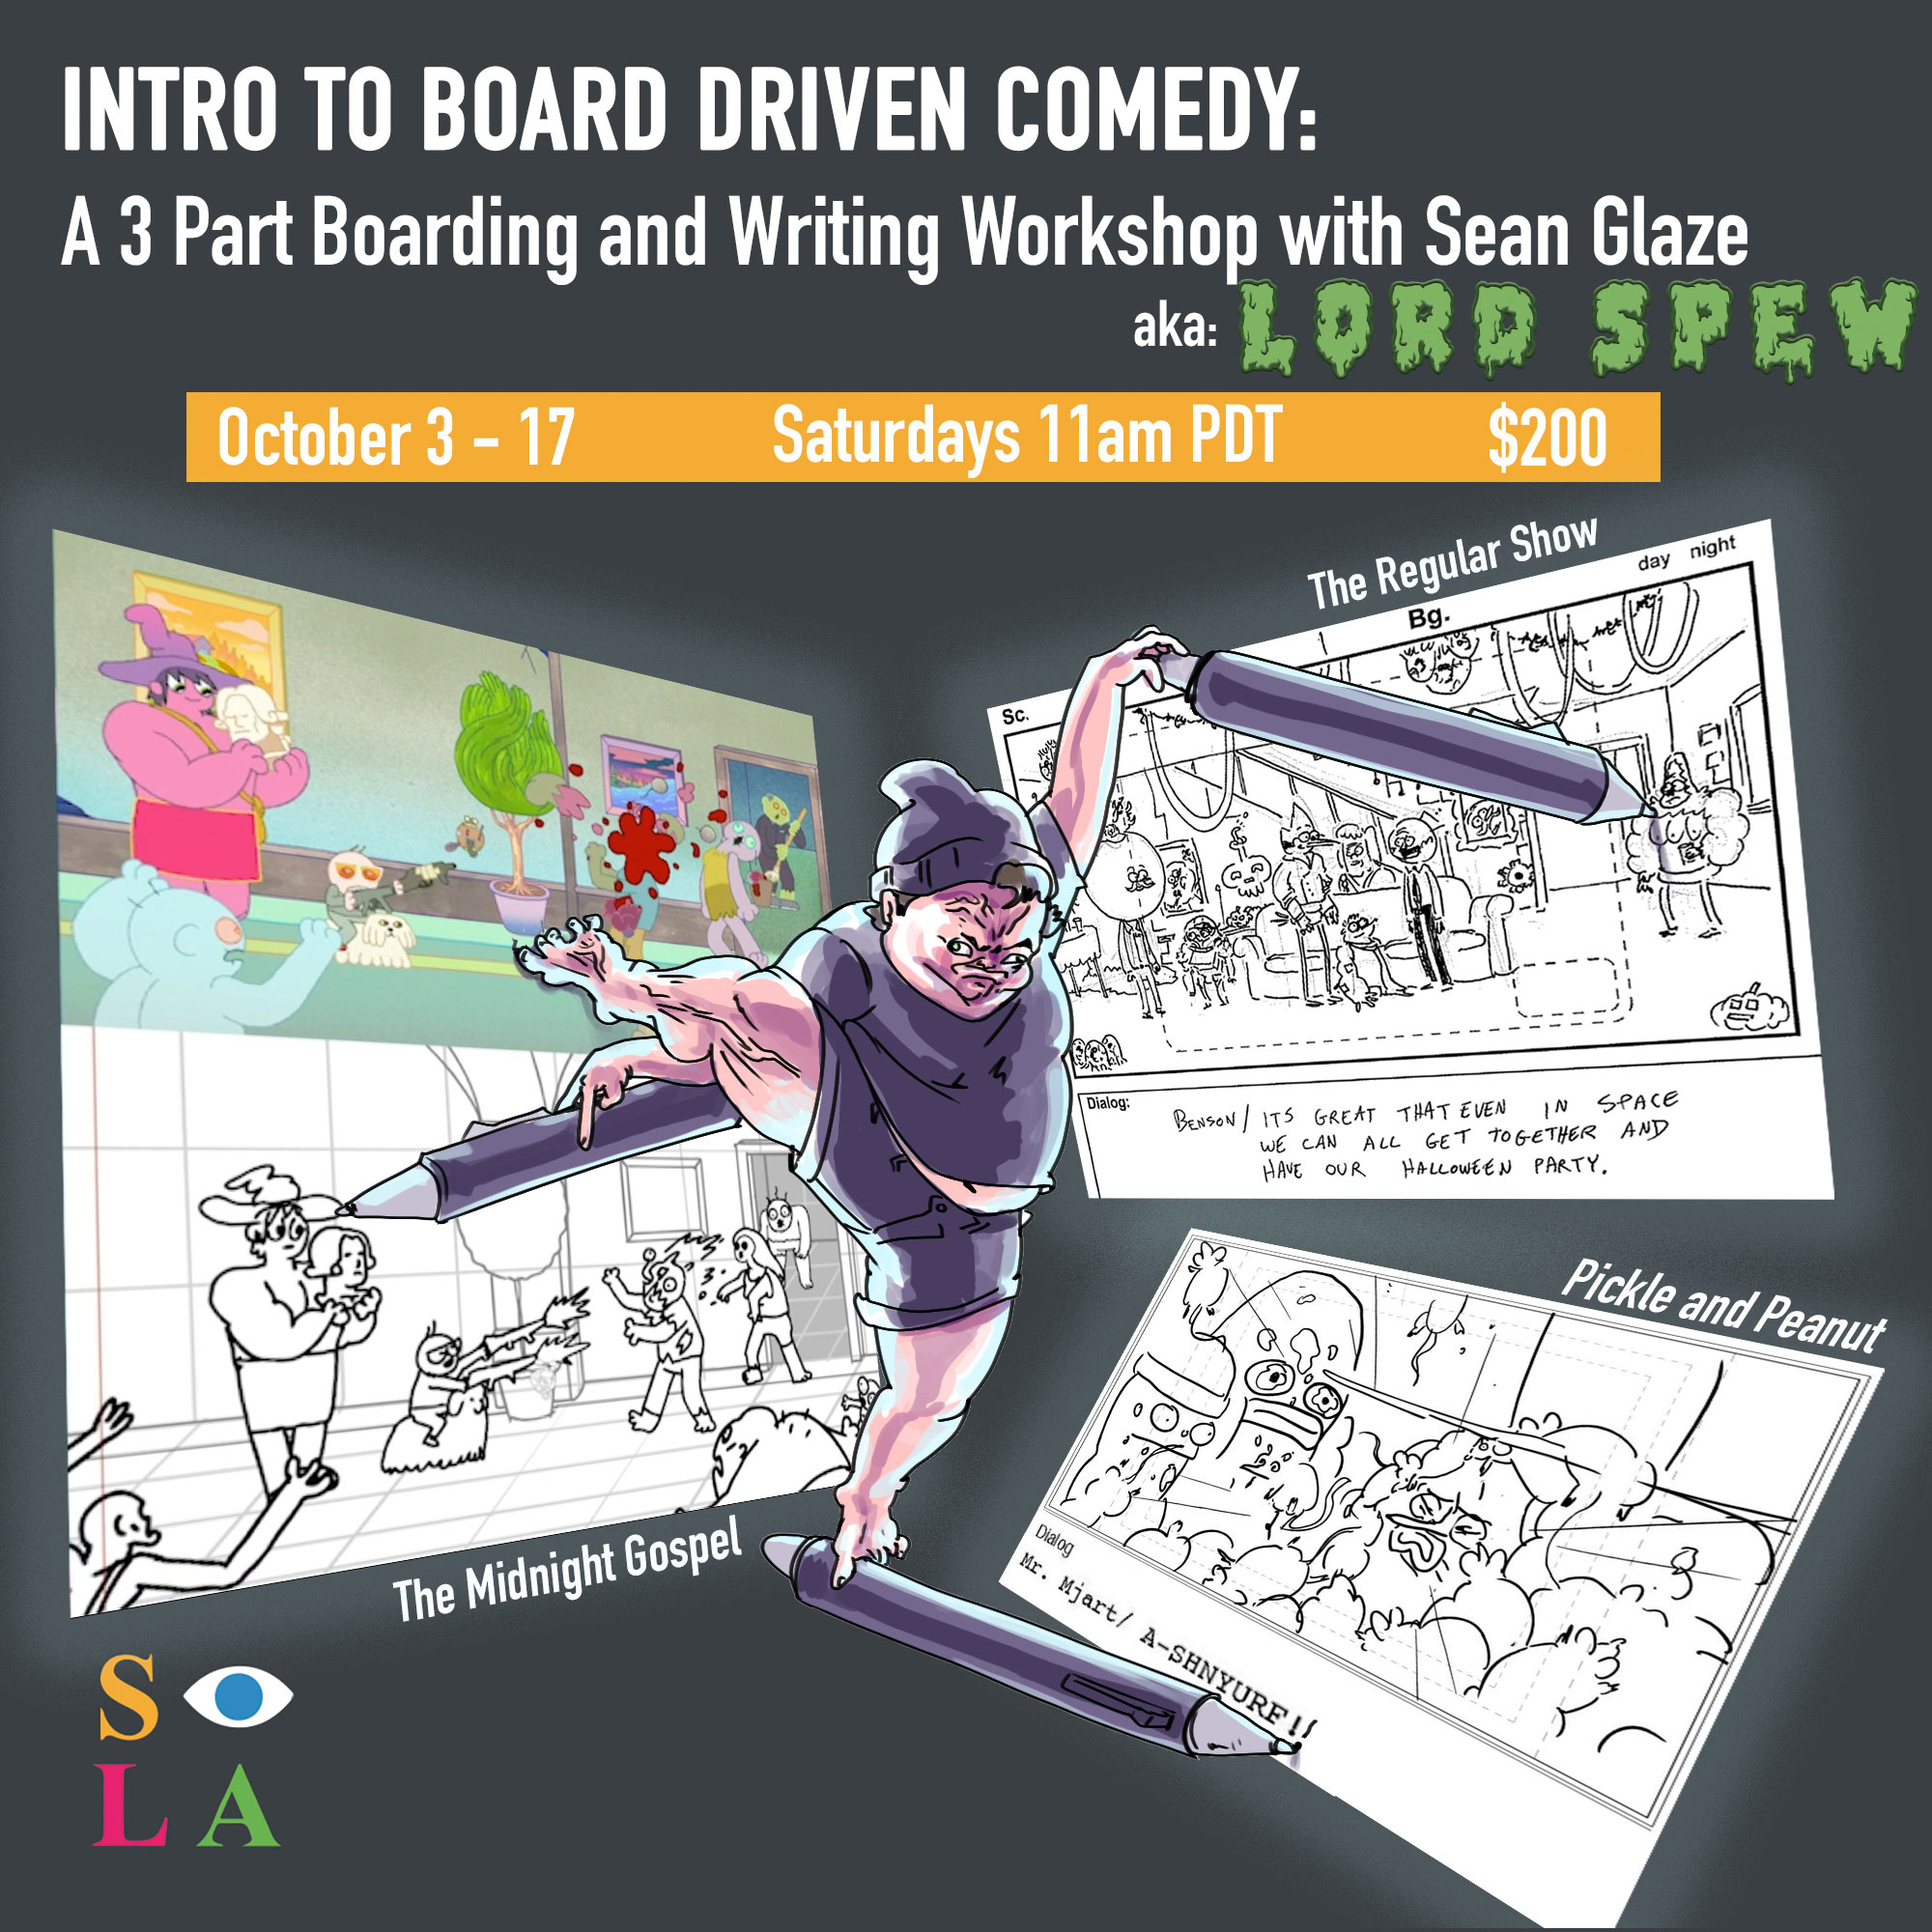 FILLED! Workshop: Intro to Board Driven Comedy with Sean Glaze – October 3-17th 11:00 am PDT $200.00